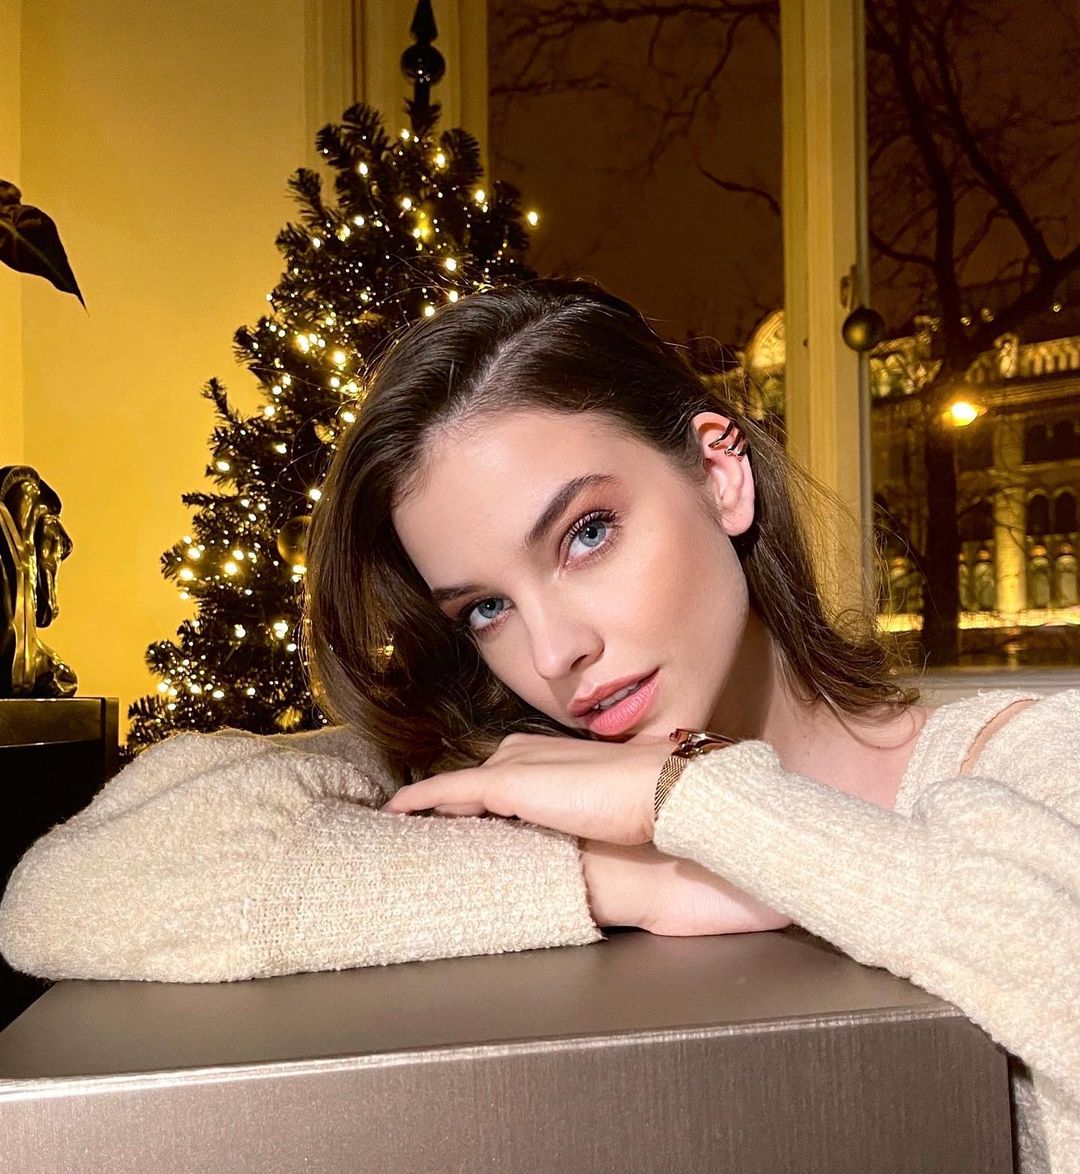 Photos n°73 : Barbara Palvin is Ready for Date Night!